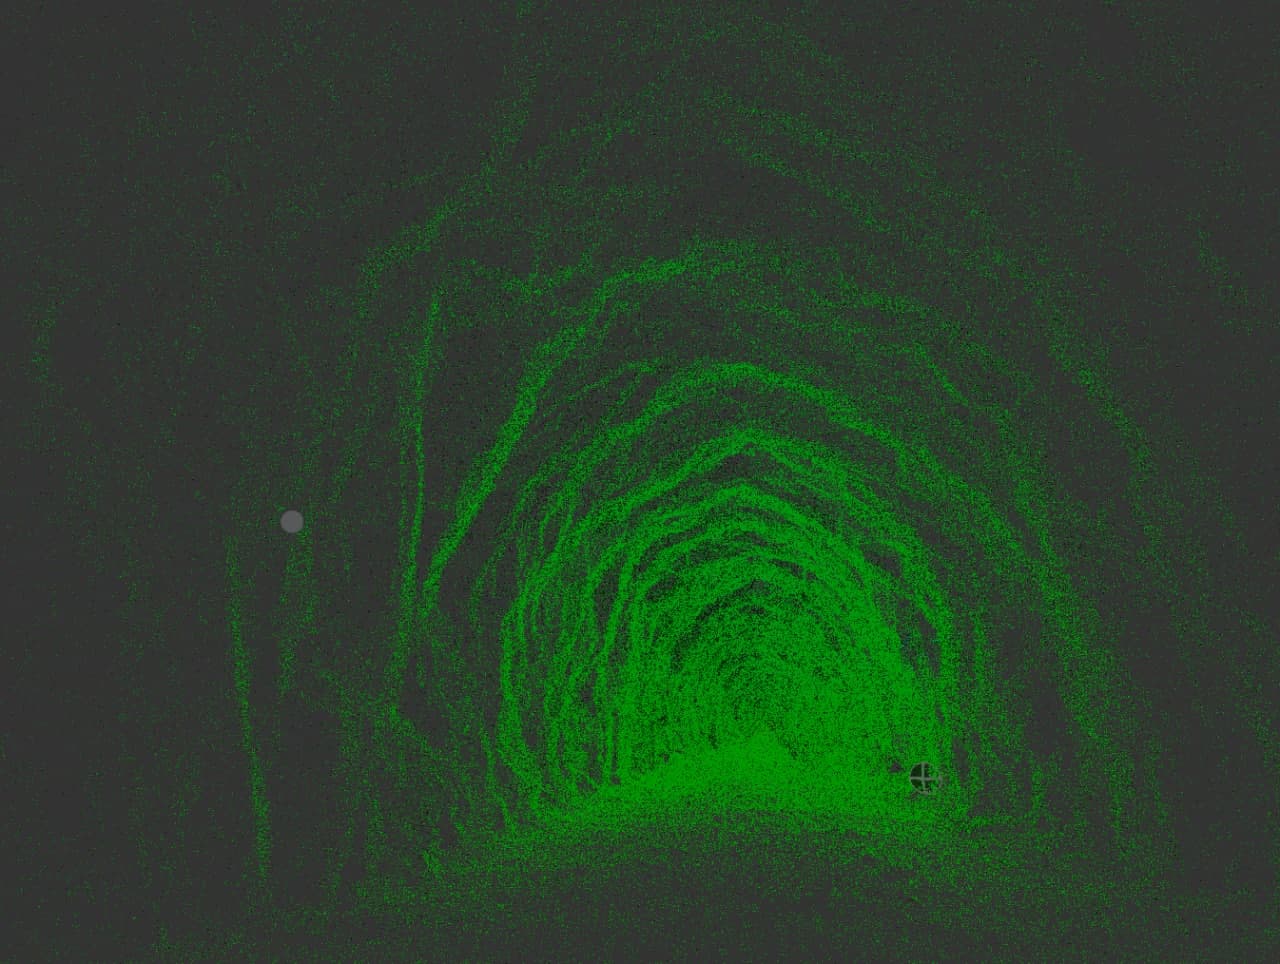 LiDAR scan of a tunnel covered in moss captured using Sensorem drones.